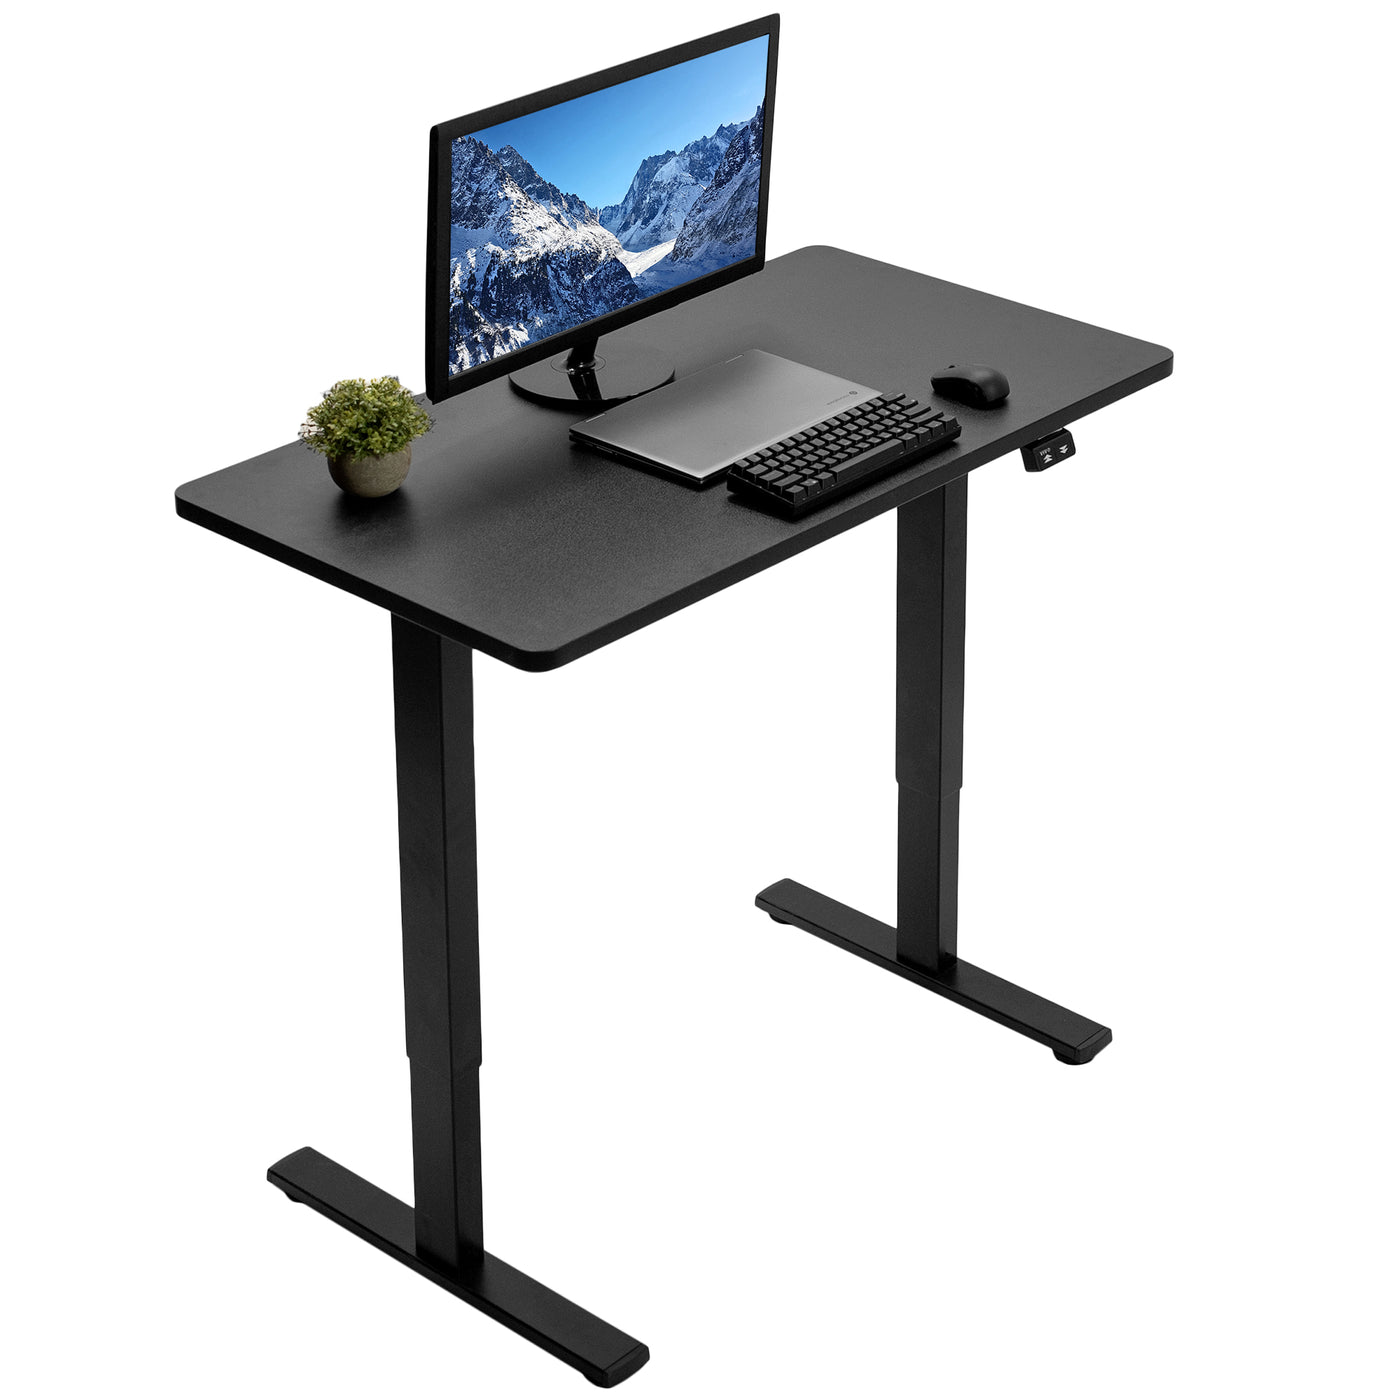 Single panel sit-to-stand electric desk from VIVO.